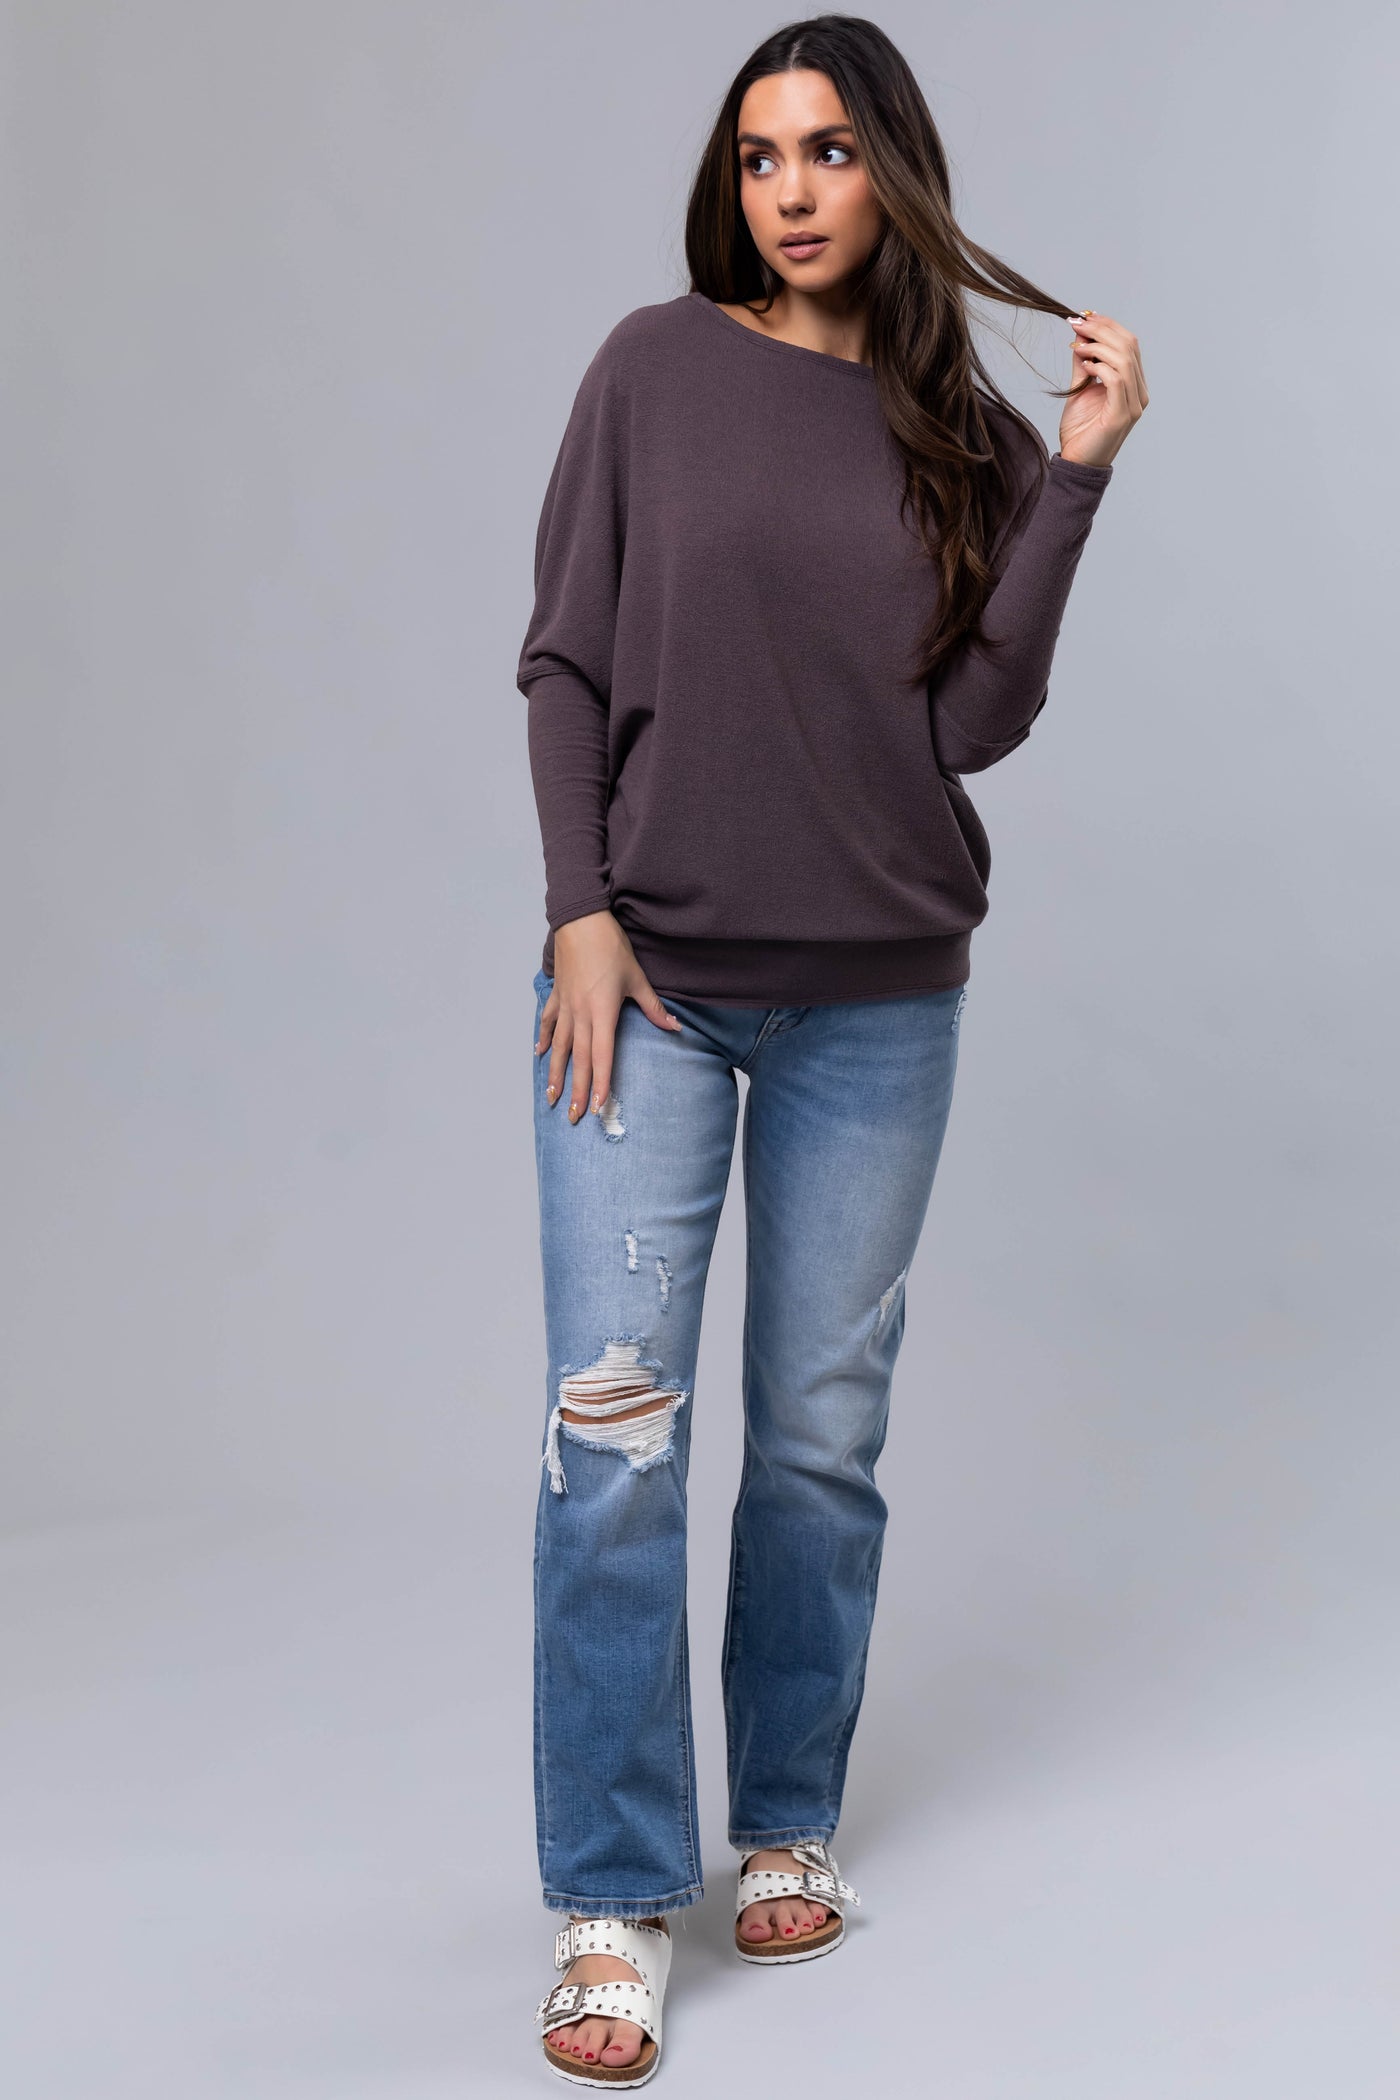 Dark Mocha Round Neck Knit Top with Long Dolman Sleeves